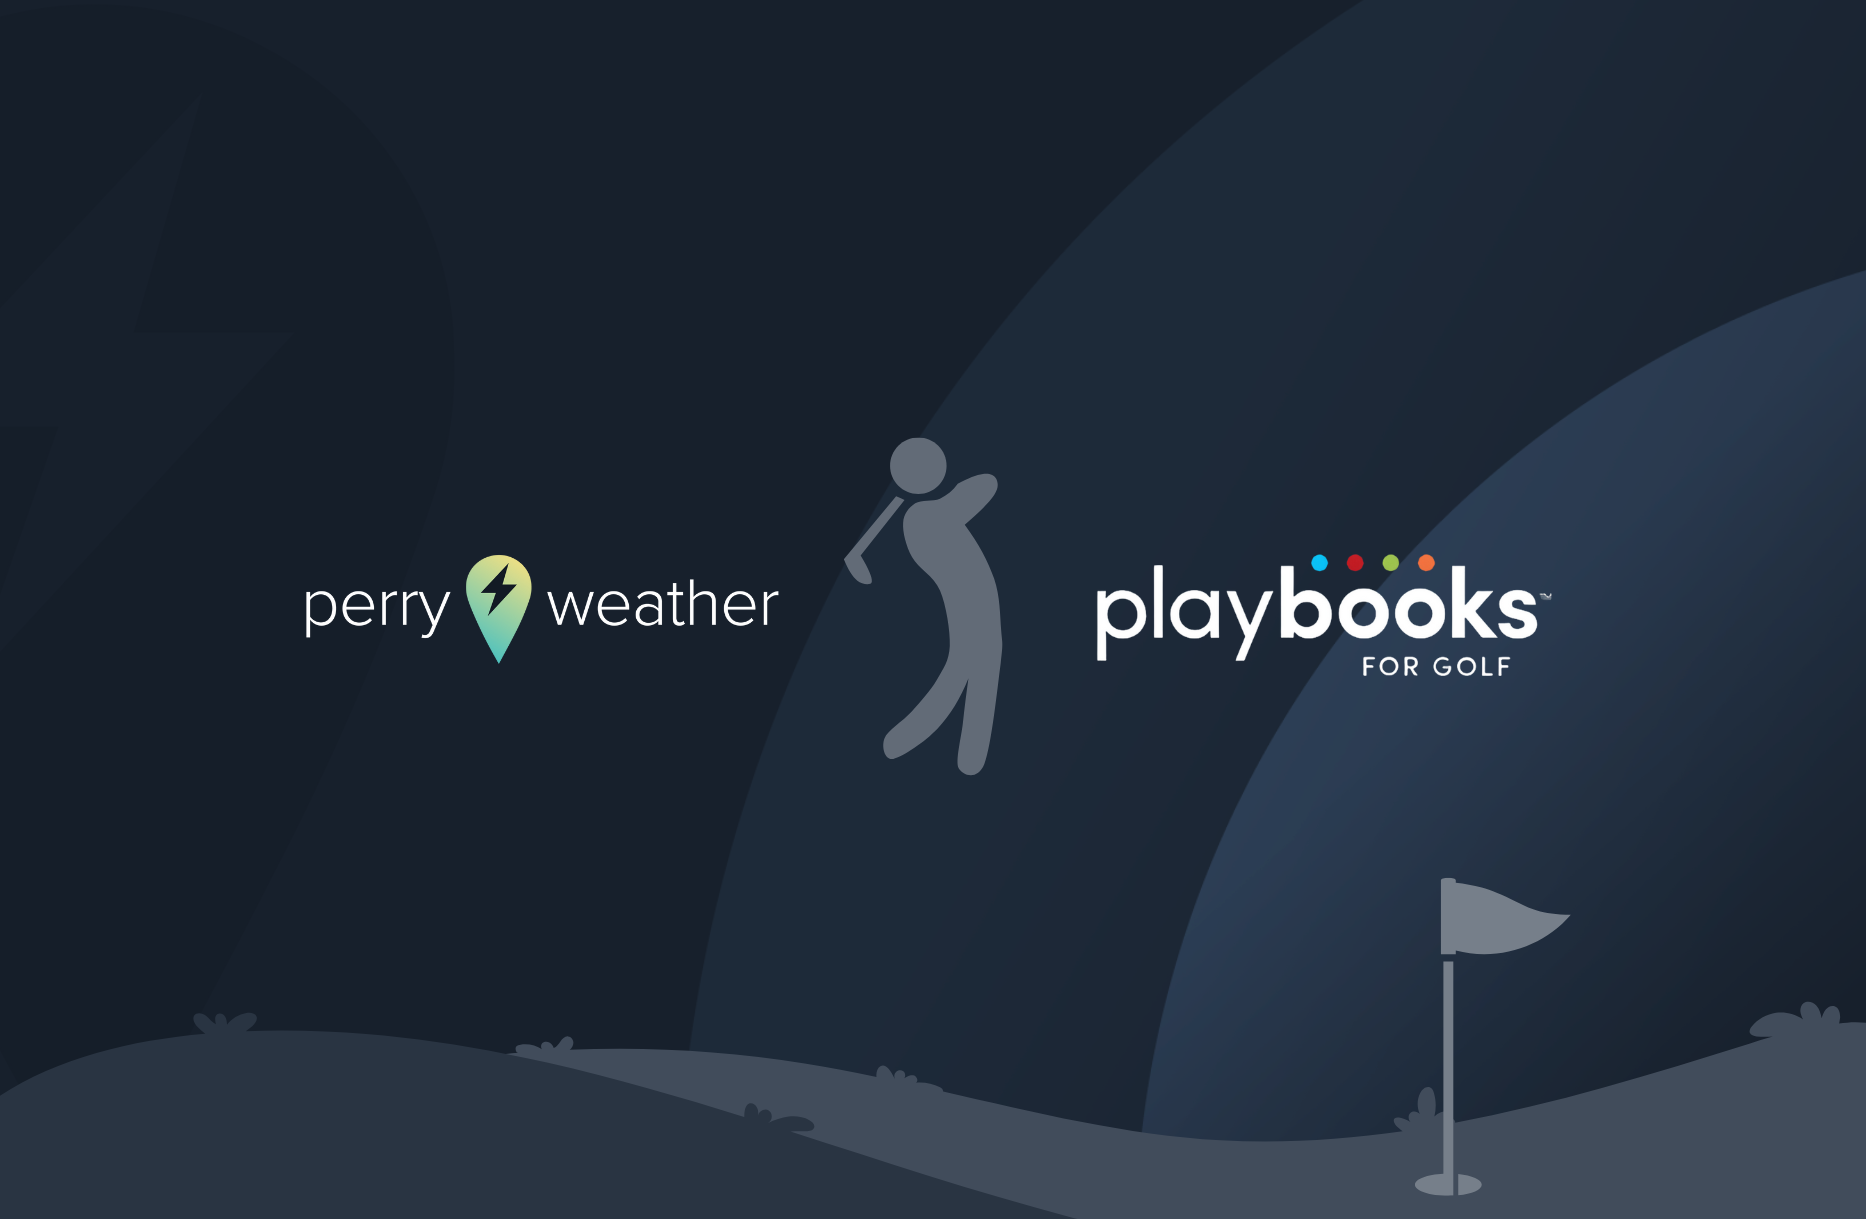 Perry Weather, Playbooks for Golf announce new partnership